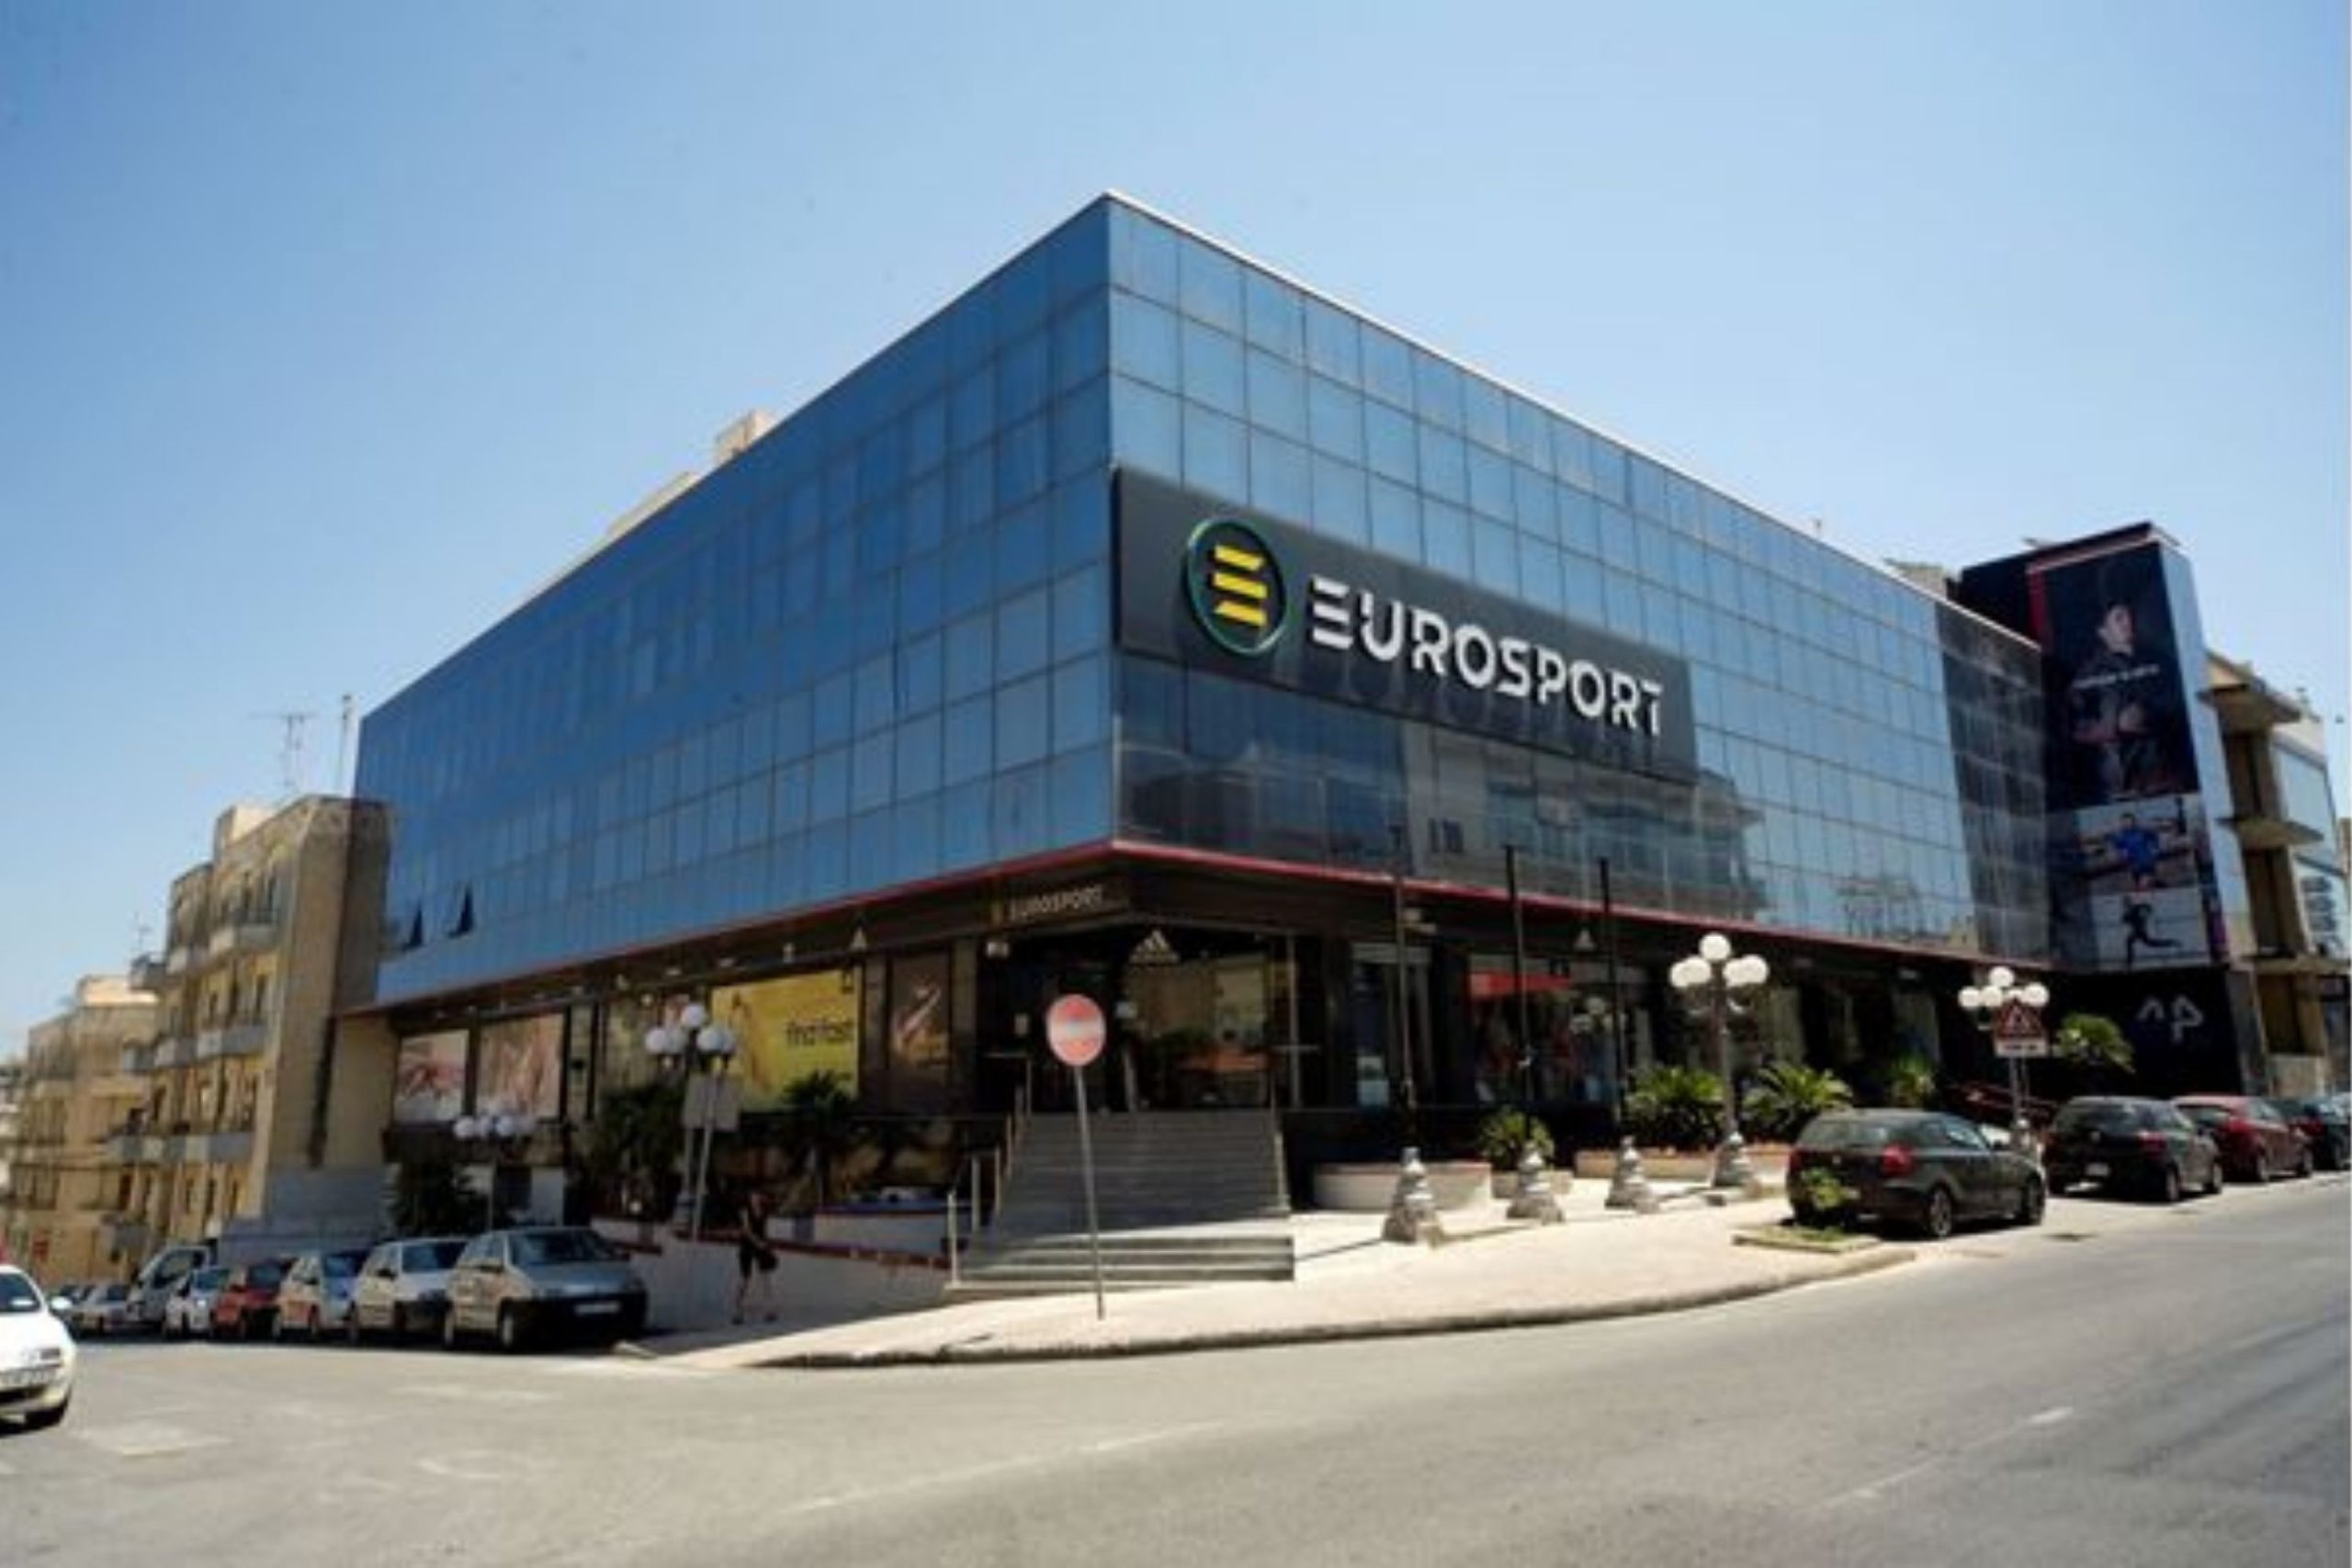 A complete Air Conditioning System can be found in place at Eurosport, Bkara Malta